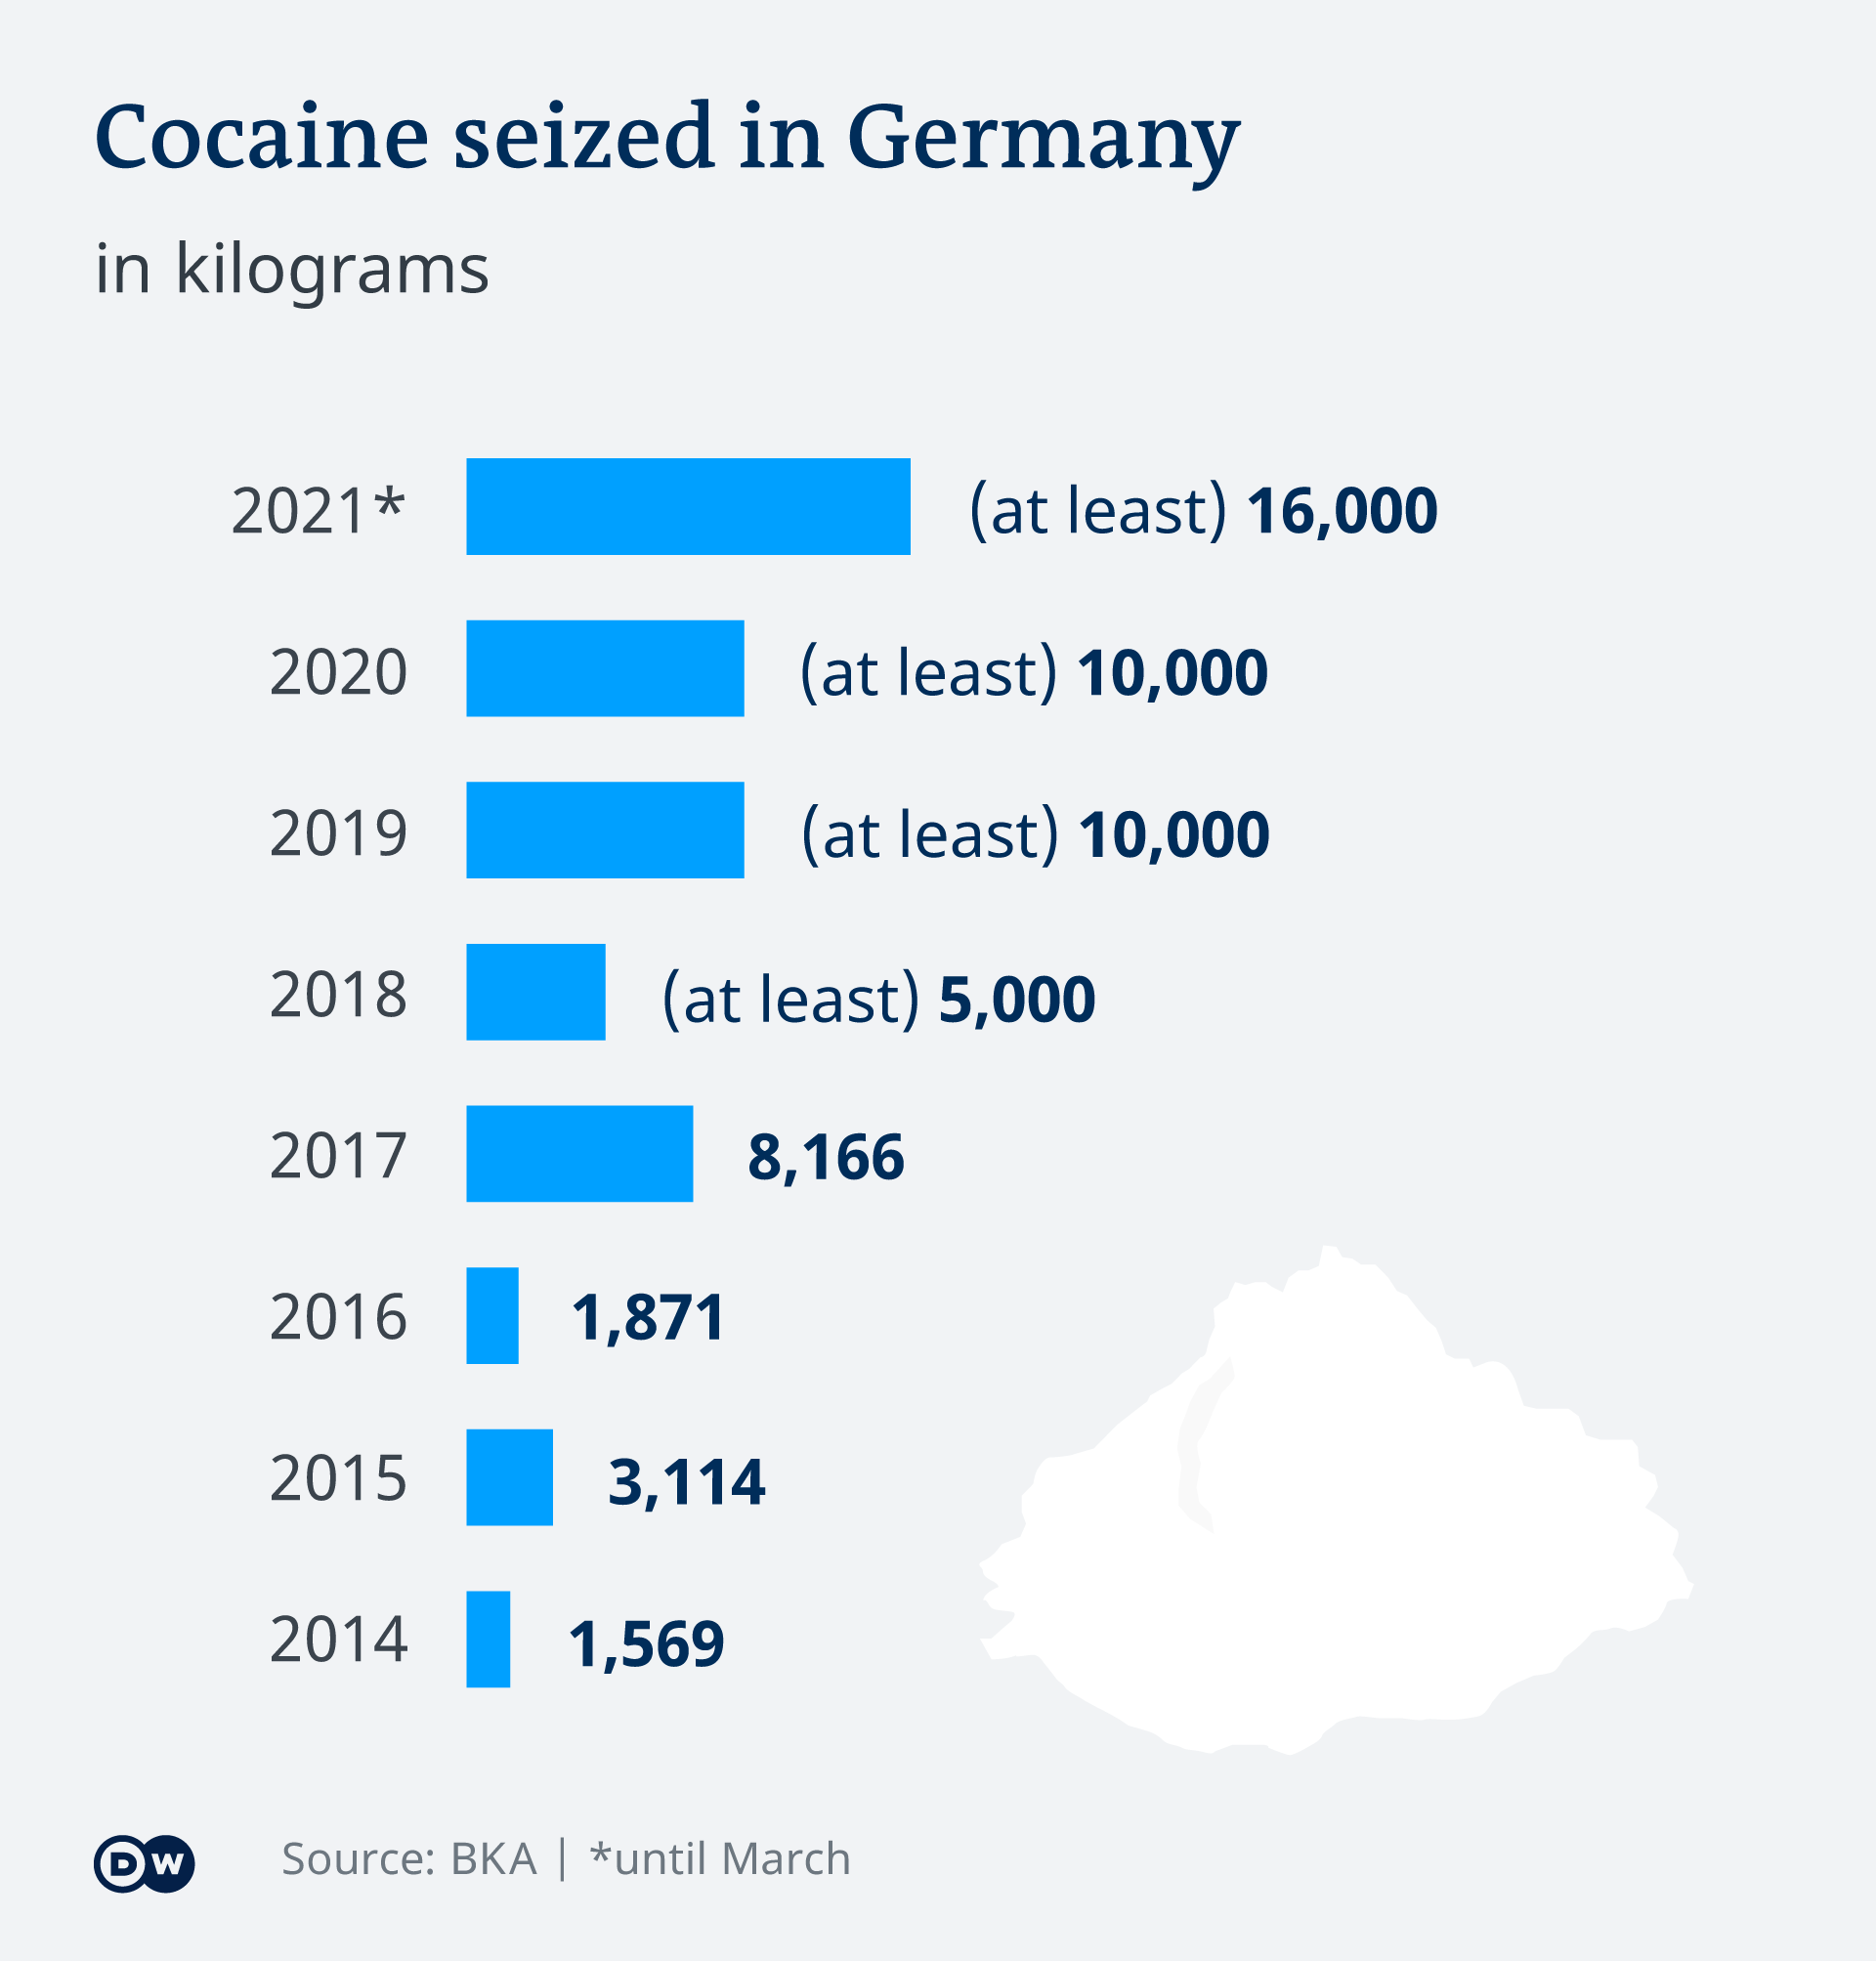 Infographic showing cocaine seized in Germany in recent years